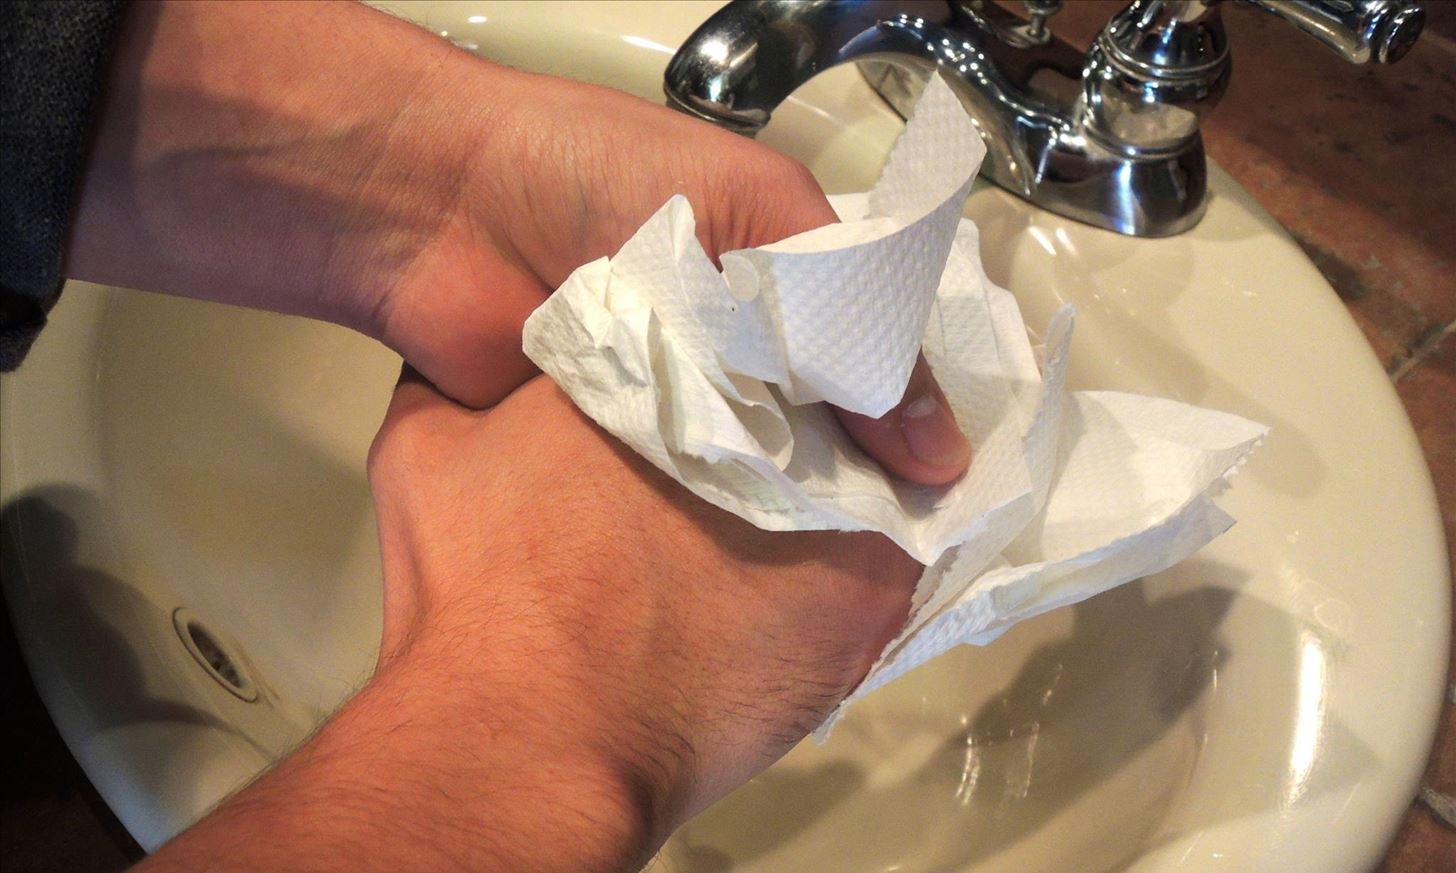 Six Things You're Definitely Doing Wrong in the Restroom—As Proven by Science